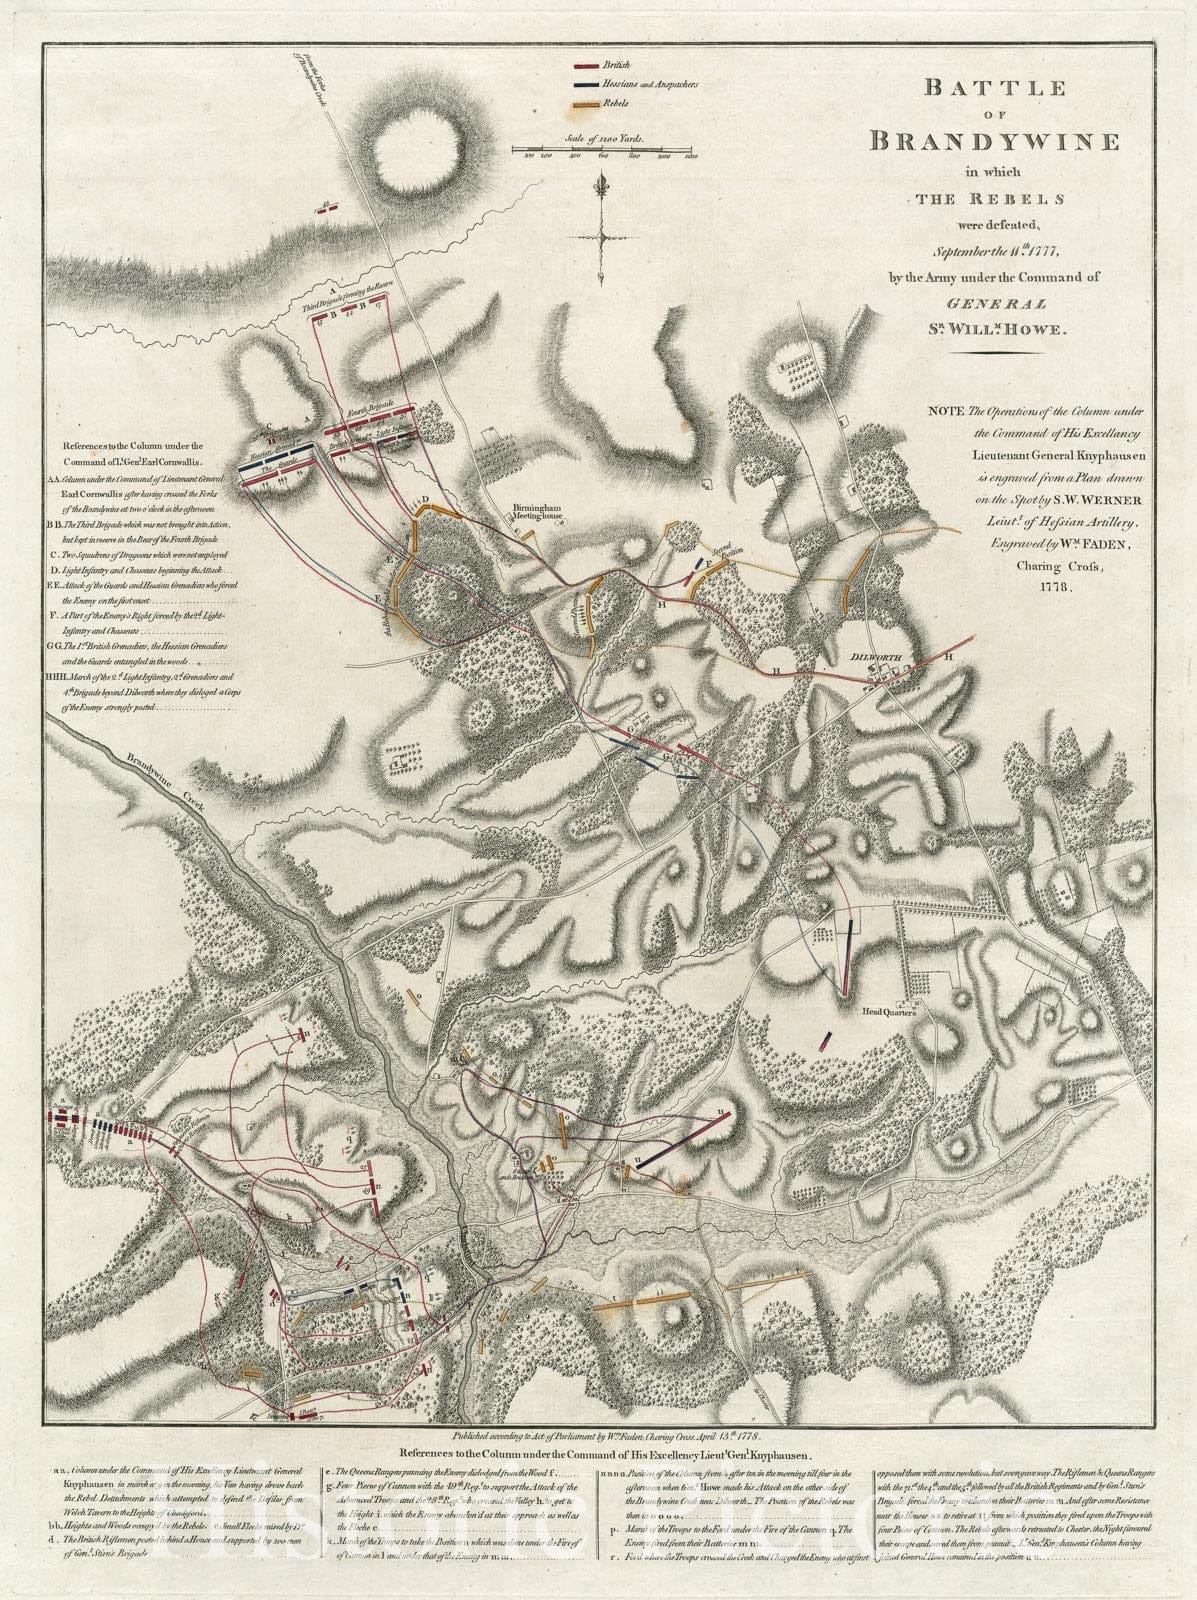 Historical Map, Battle of Brandywine in which The Rebels were Defeated, September The 11th. 1777, by The Army Under The Command of General Sr. Willm. Howe, Vintage Wall Art